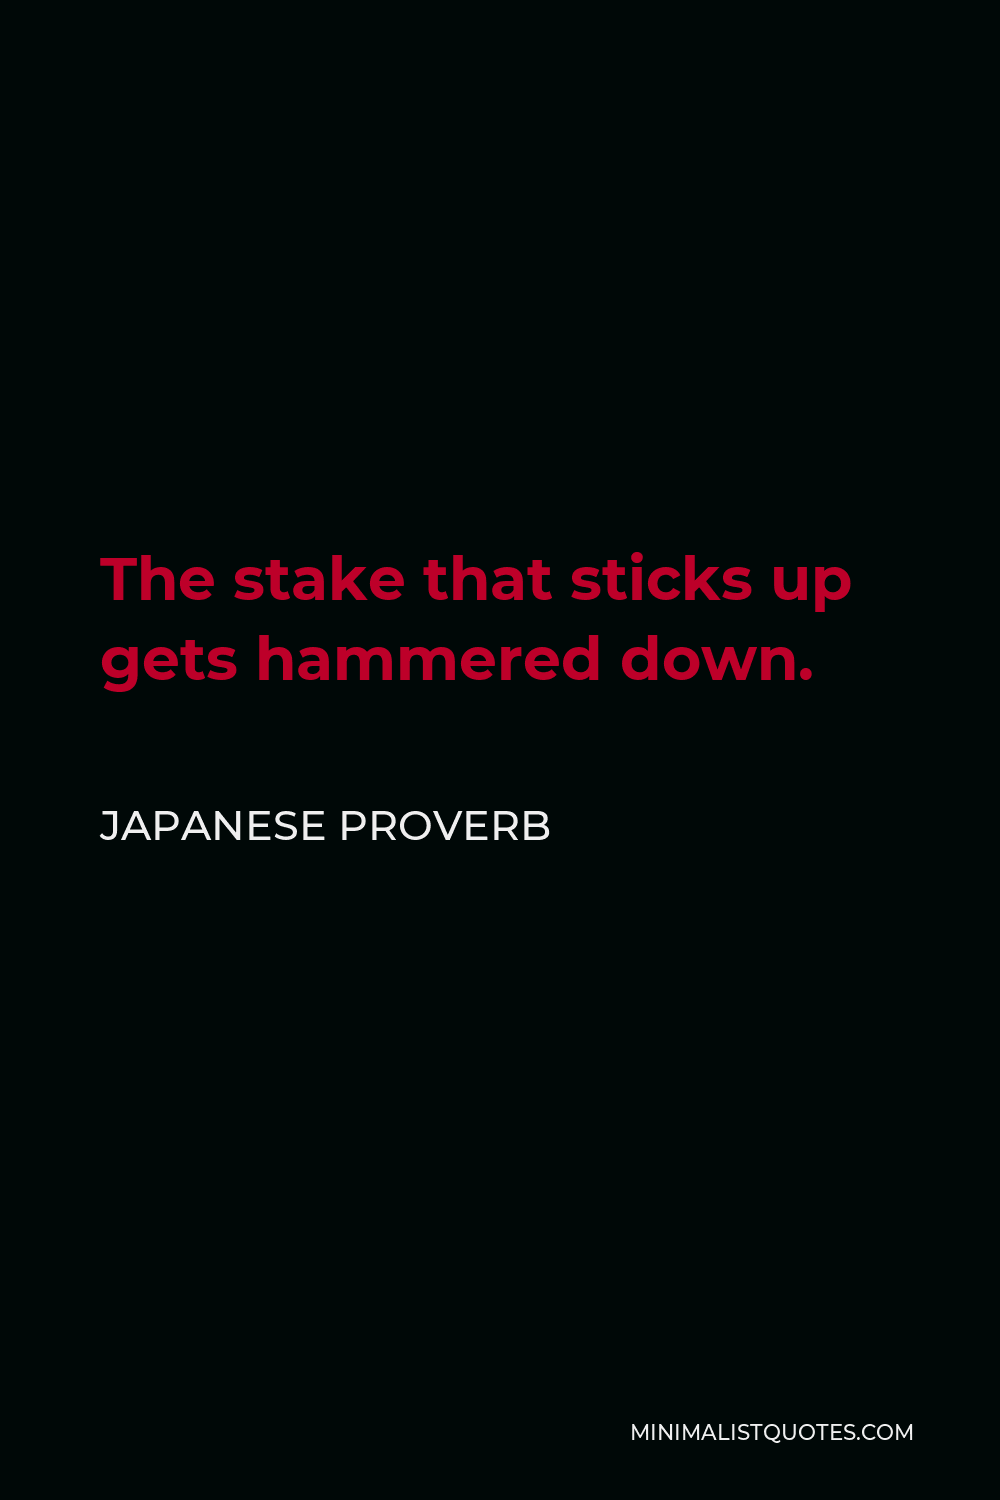 Japanese Proverb Quote - The stake that sticks up gets hammered down.